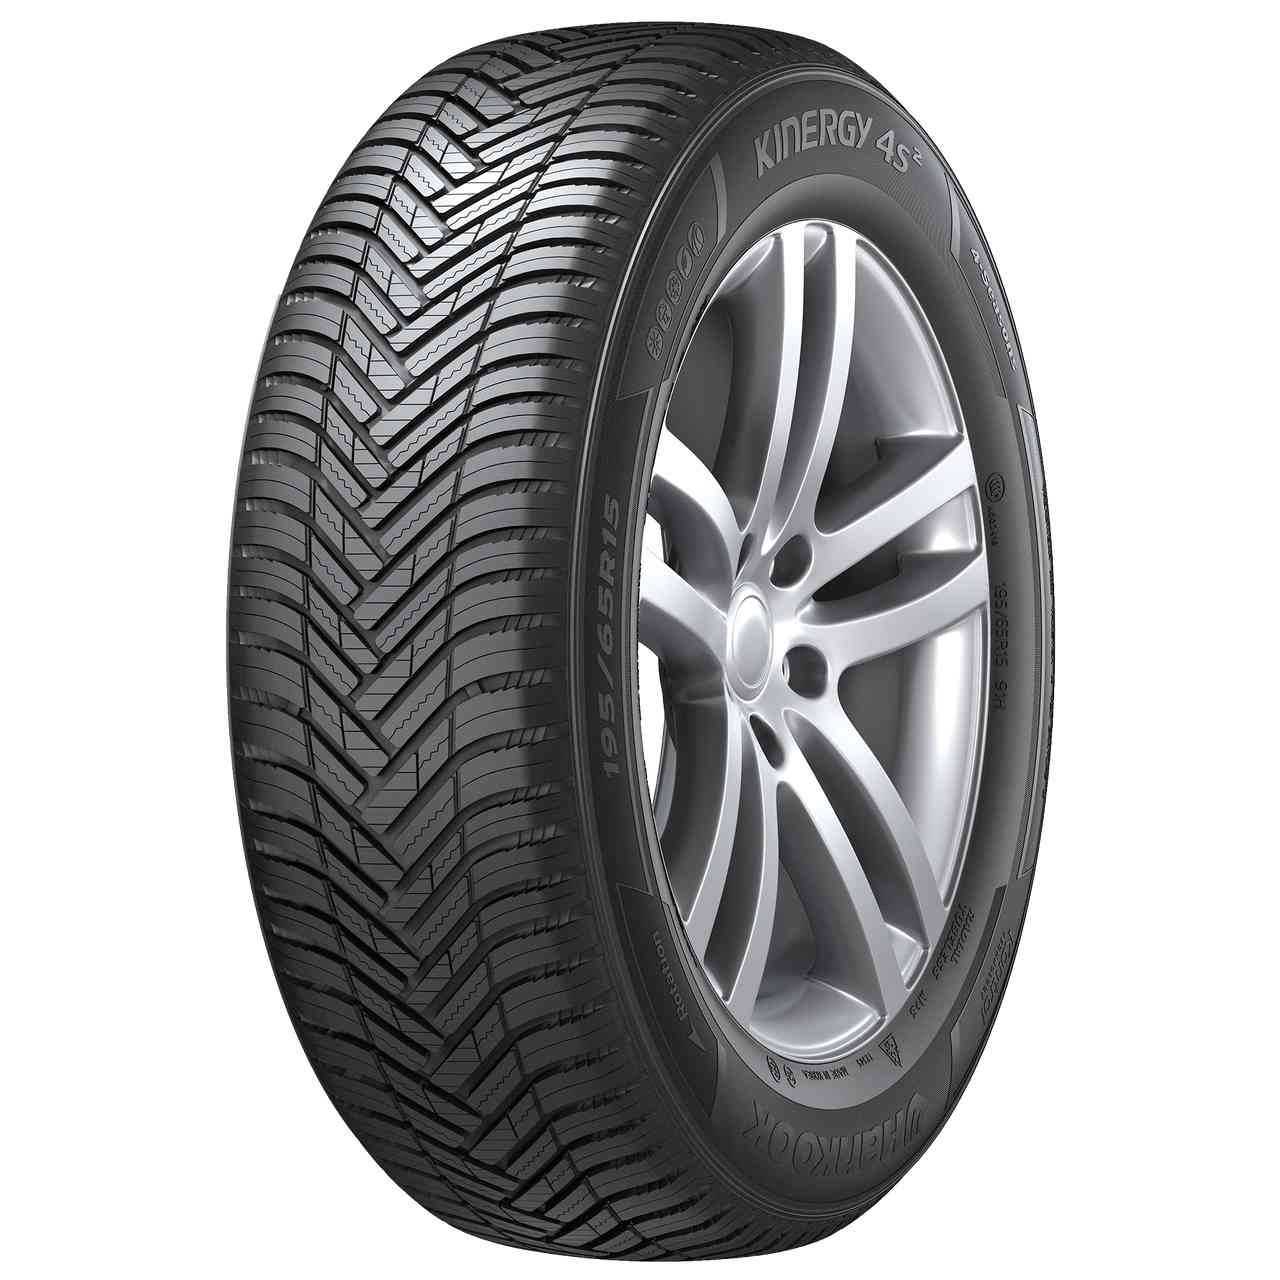 HANKOOK KINERGY 4S 2 (H750) 245/45ZR19 102Y MFS BSW